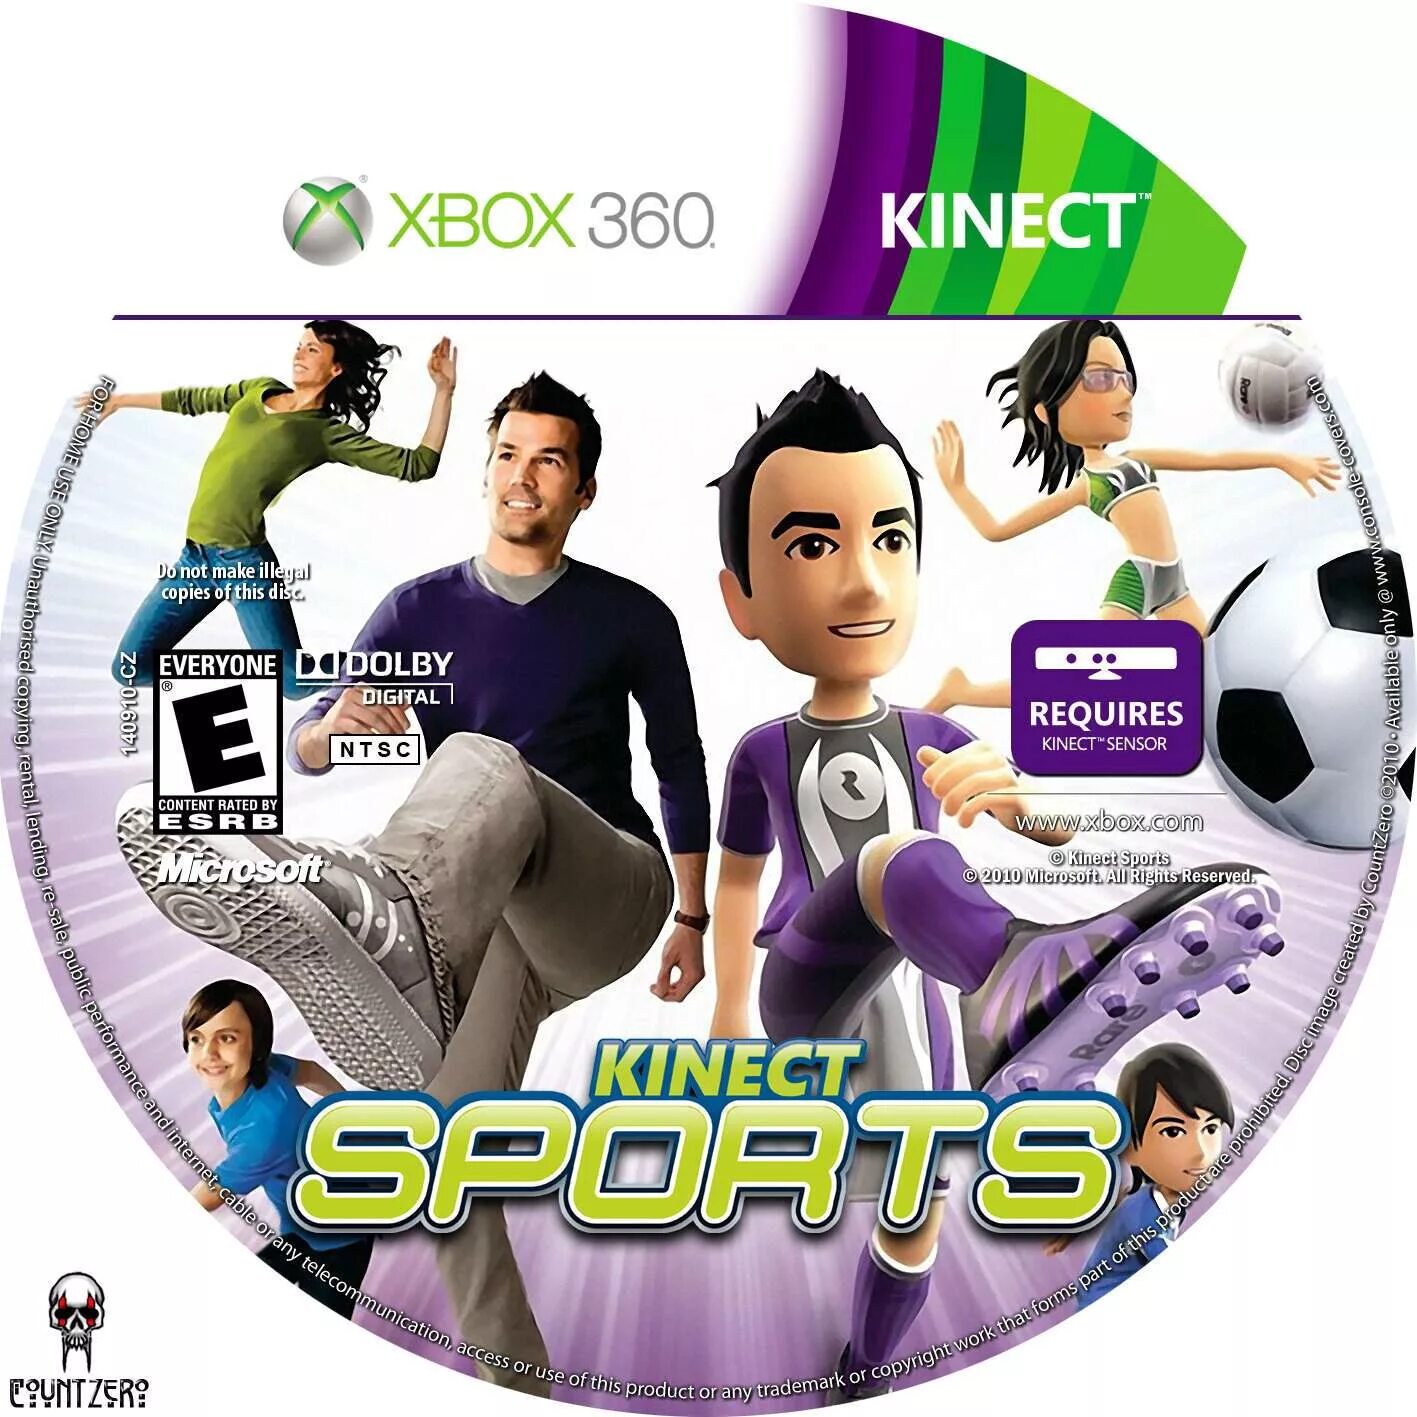 Kinect sport xbox 360. Xbox 360 Kinect Sports Ultimate. Kinect Sports Xbox 360 Disk. Kinect Sports Xbox 360 DVD. Kinect Sport Ultimate collection Xbox 360.